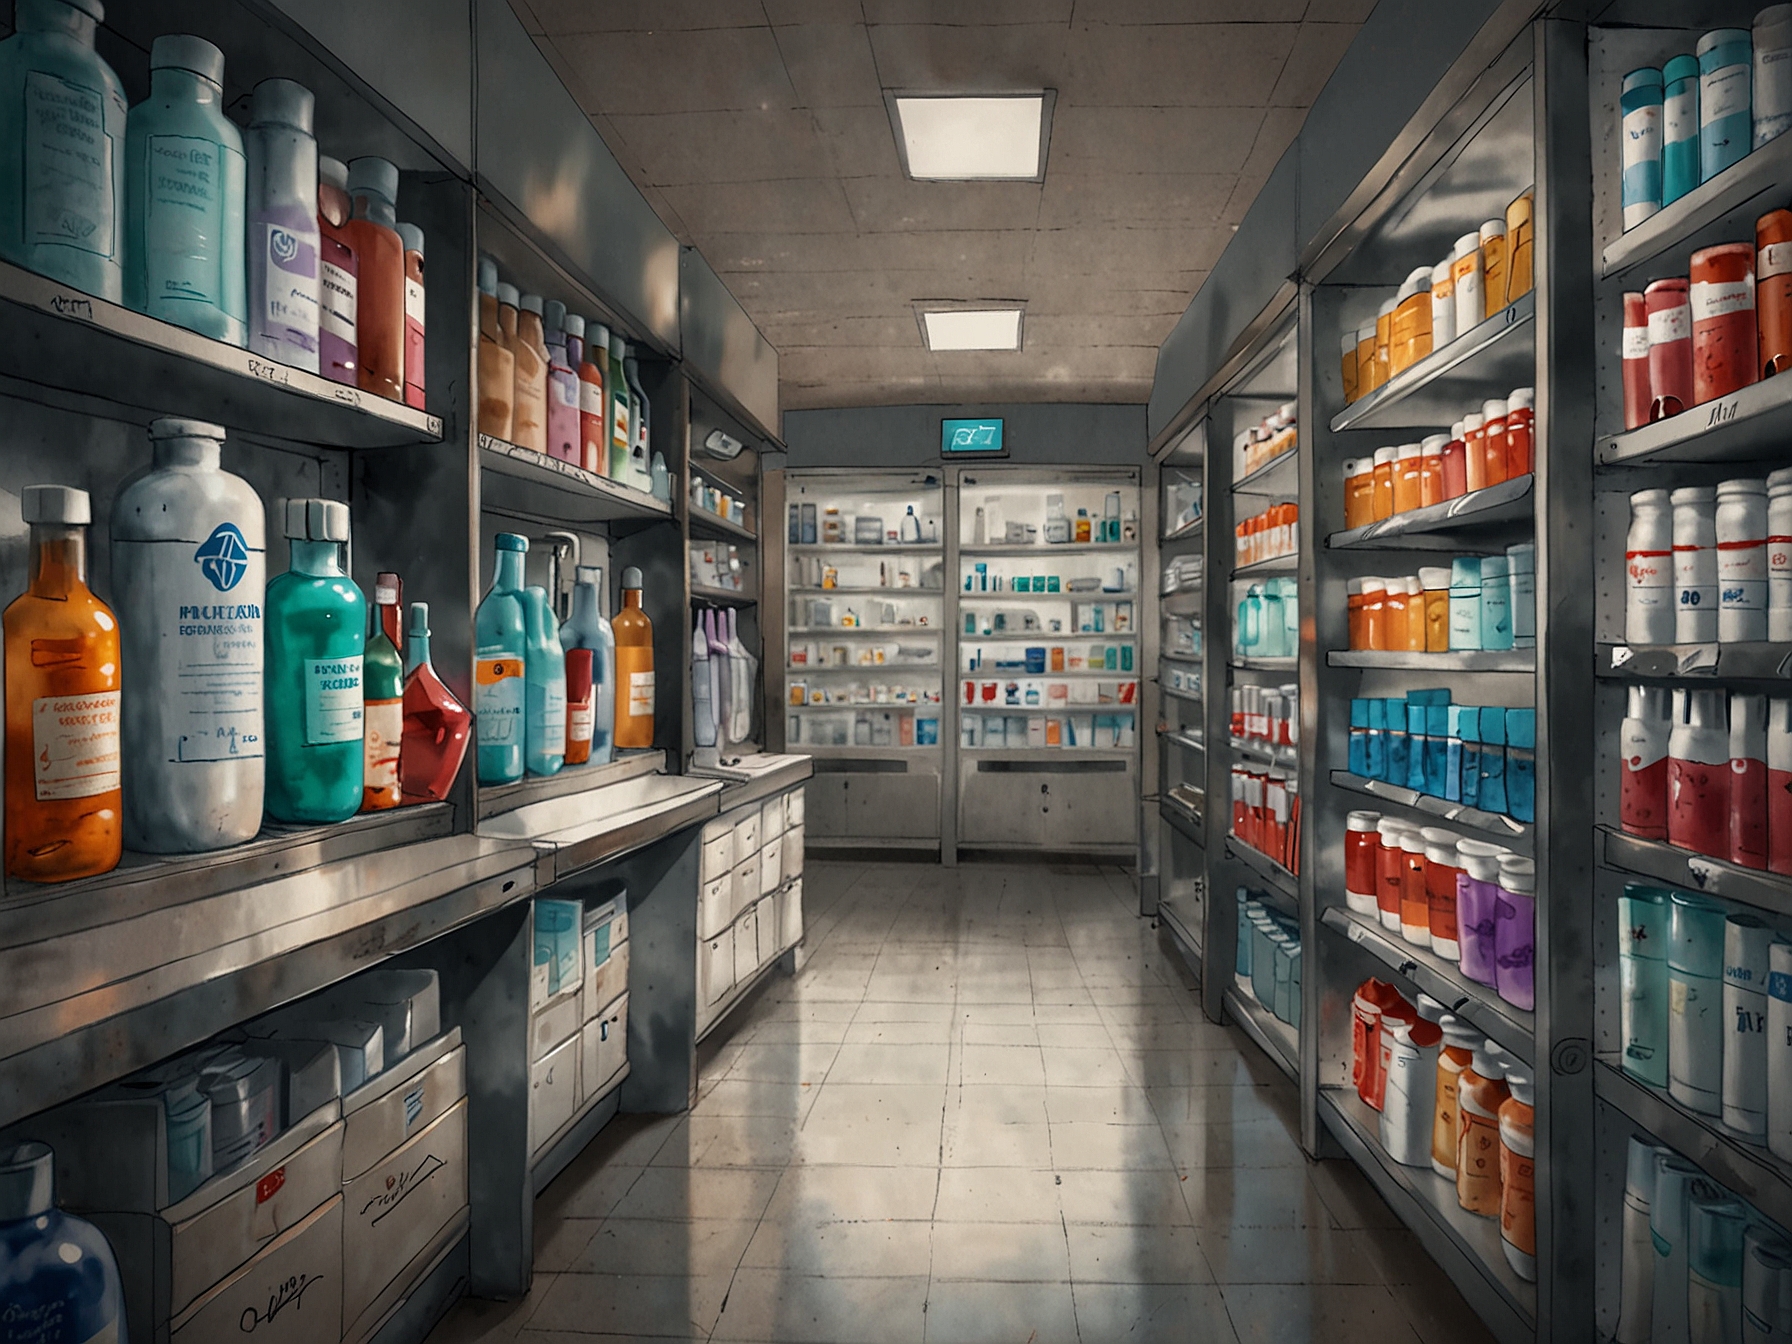 An illustration of Pfizer's extensive product portfolio, showcasing various medications, vaccines, and treatments across different therapeutic areas such as oncology and cardiology.